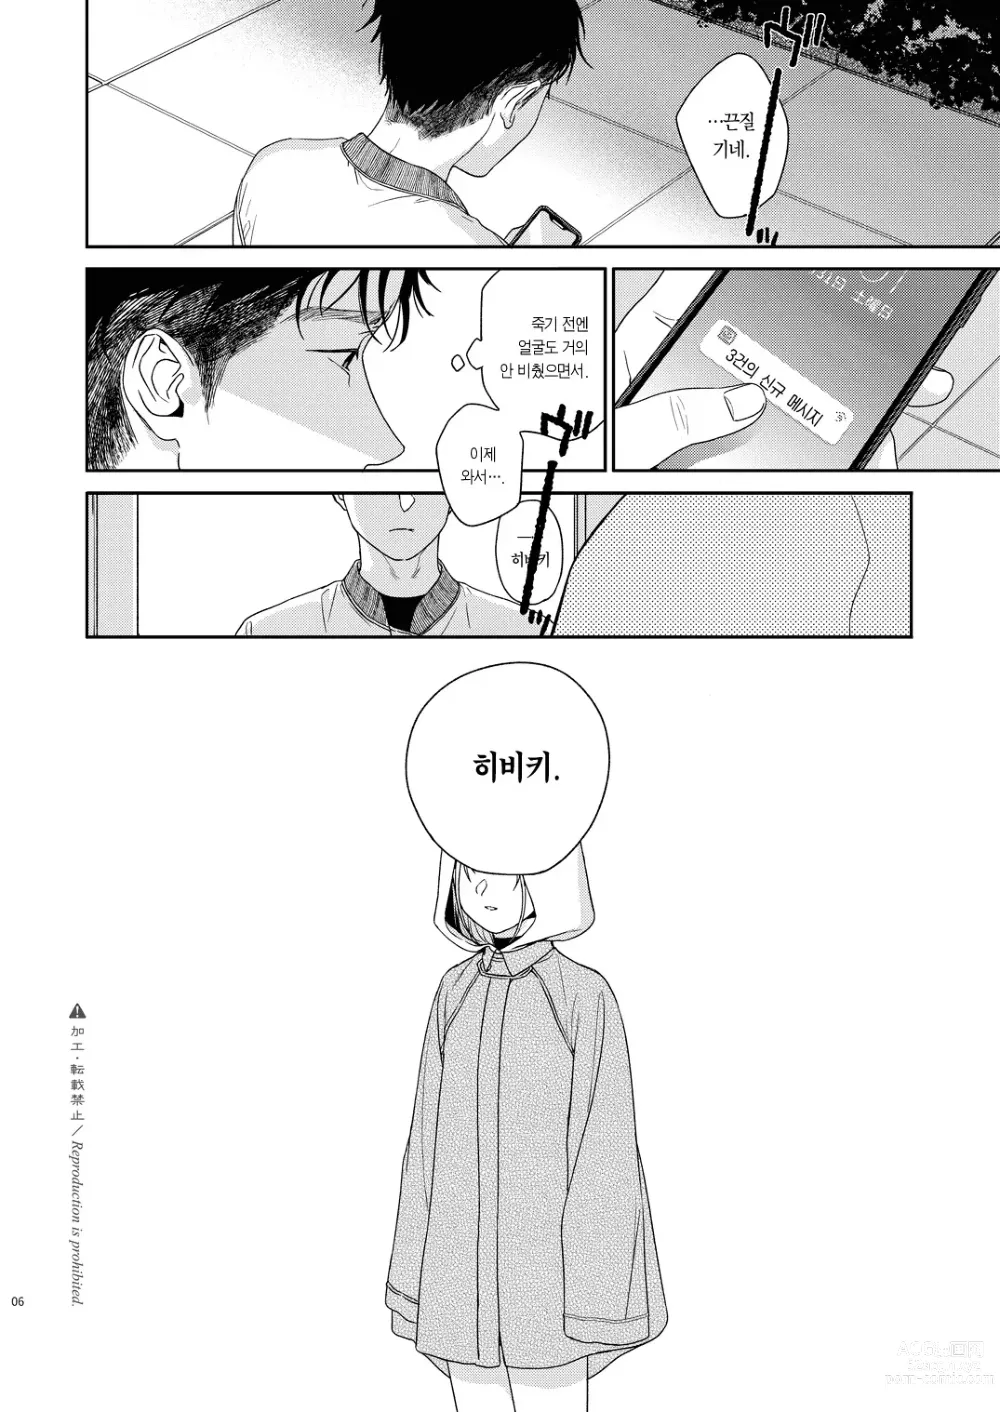 Page 7 of doujinshi 카타미와 월맹